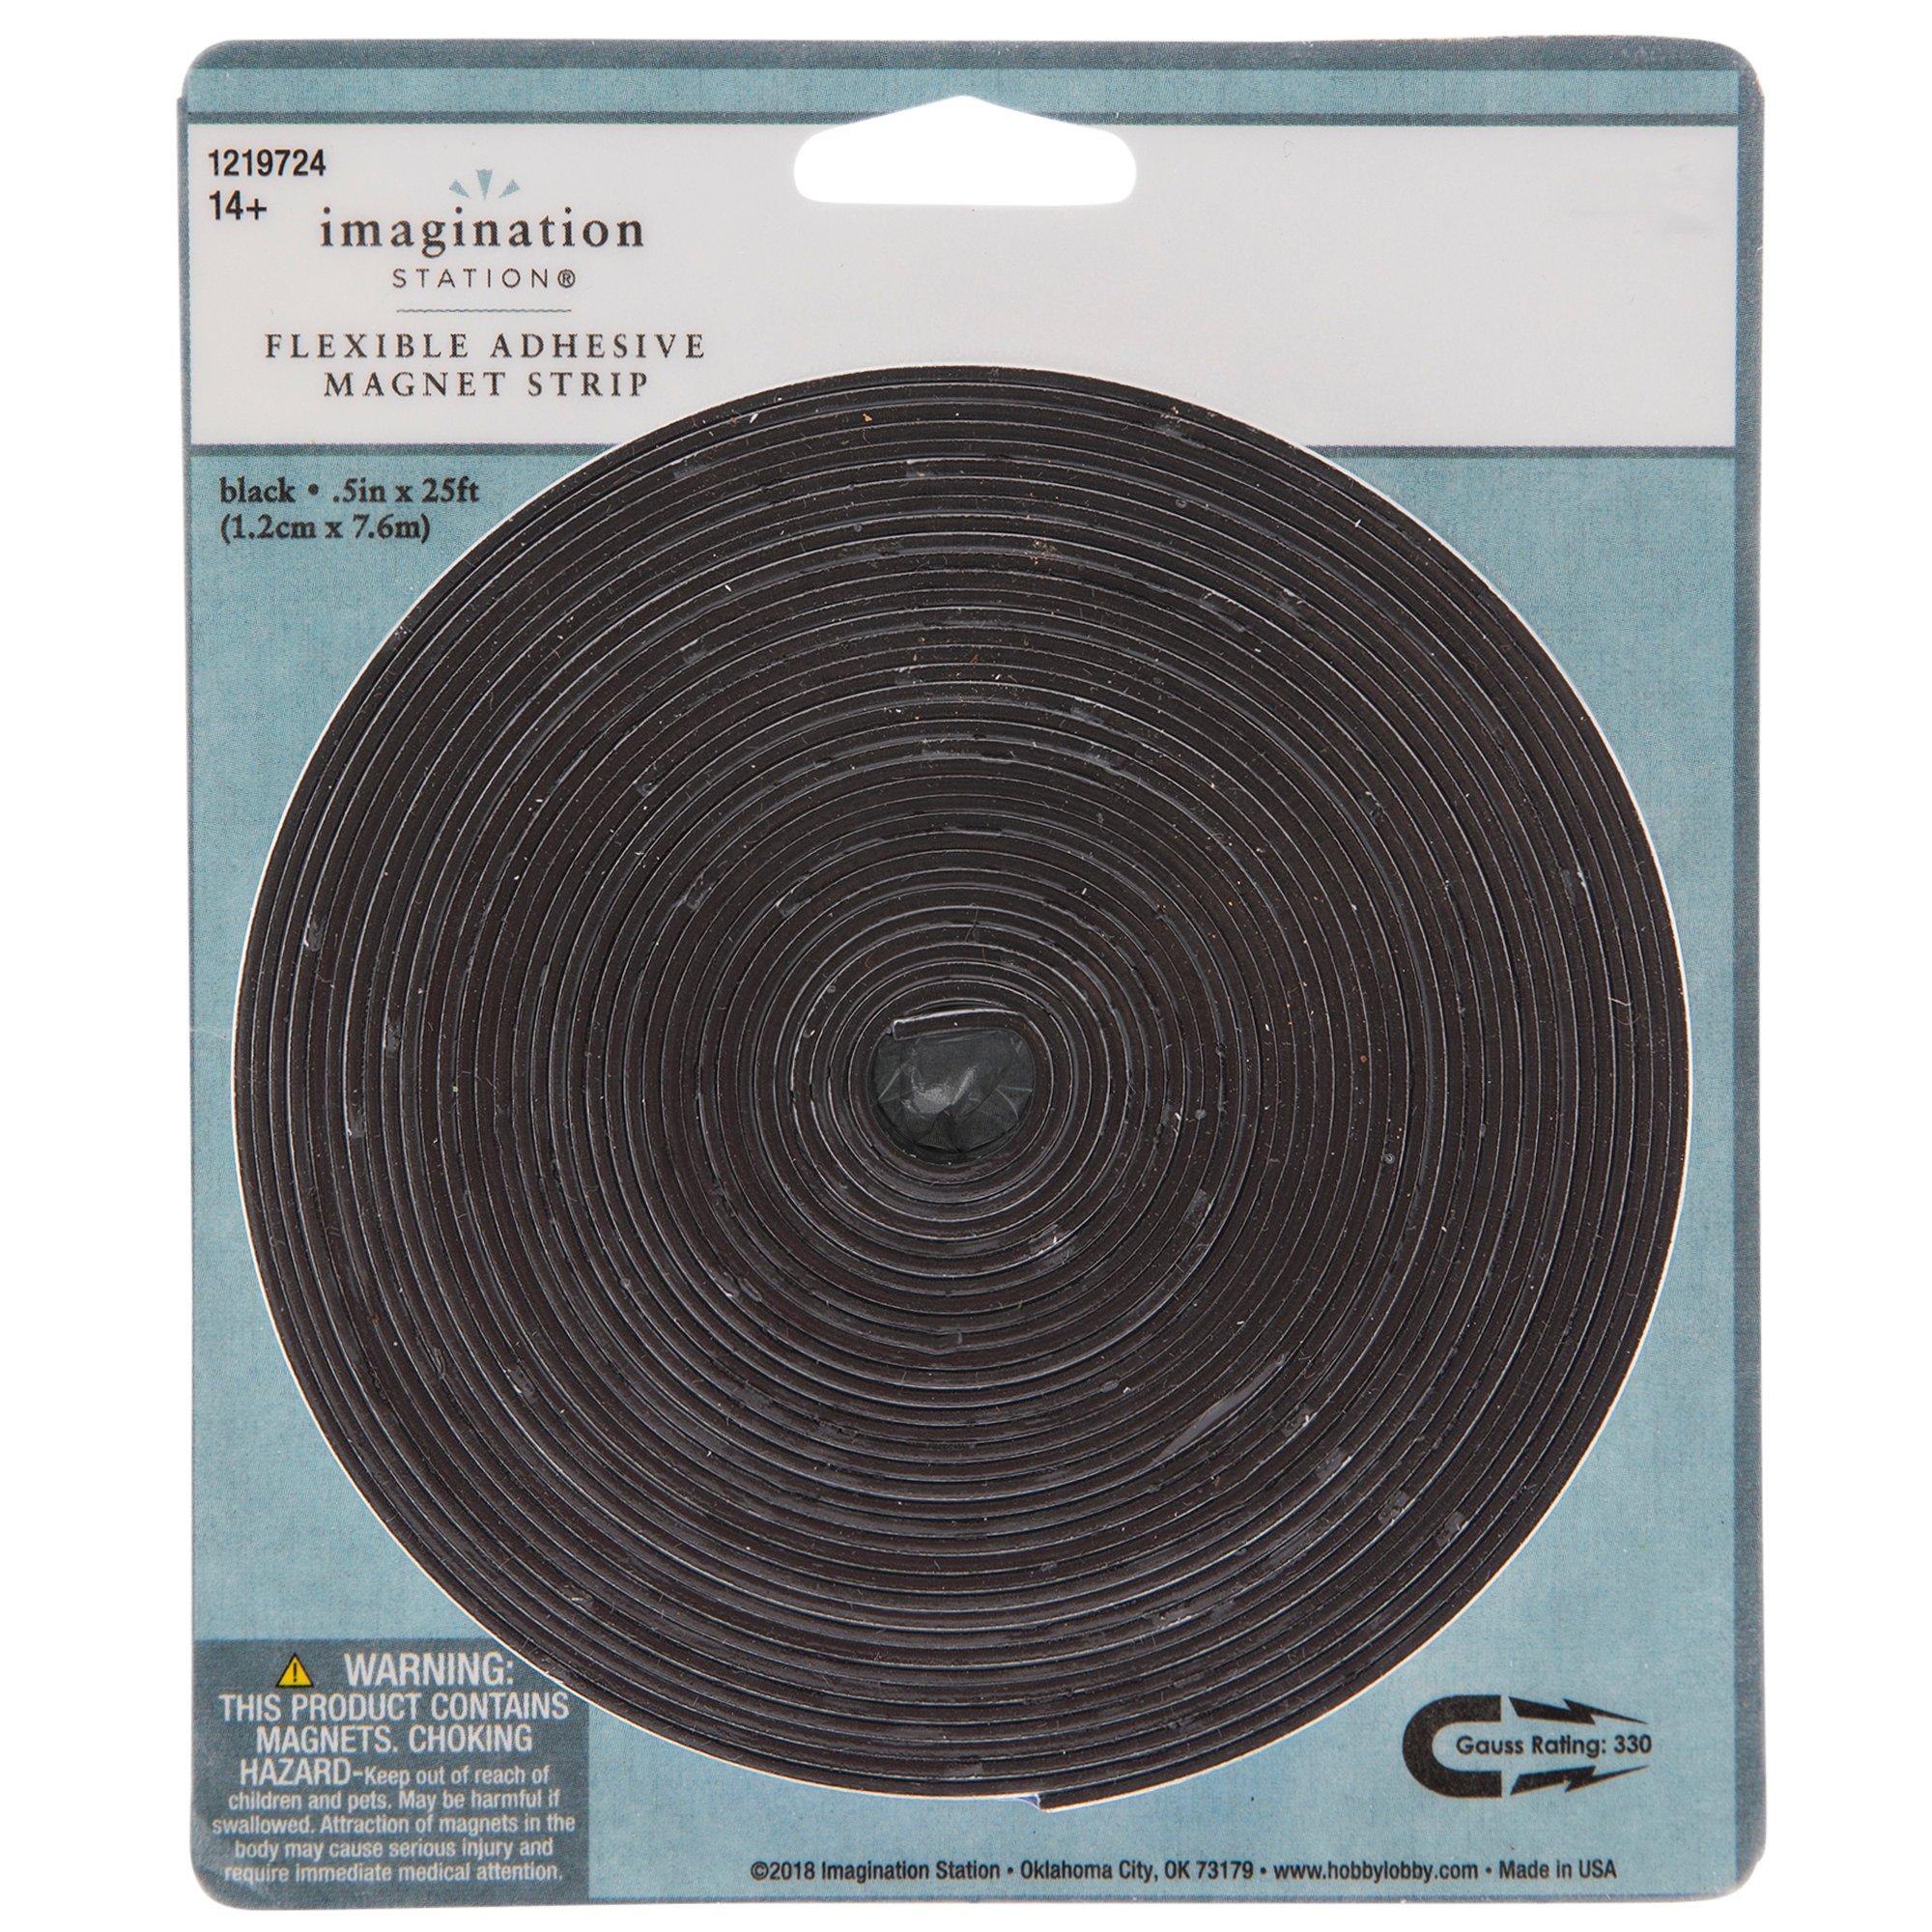 MasterVision 1/2x7' Adhesive Magnetic Roll Tape - 7 ft BVCFM2319, BVC  FM2319 - Office Supply Hut